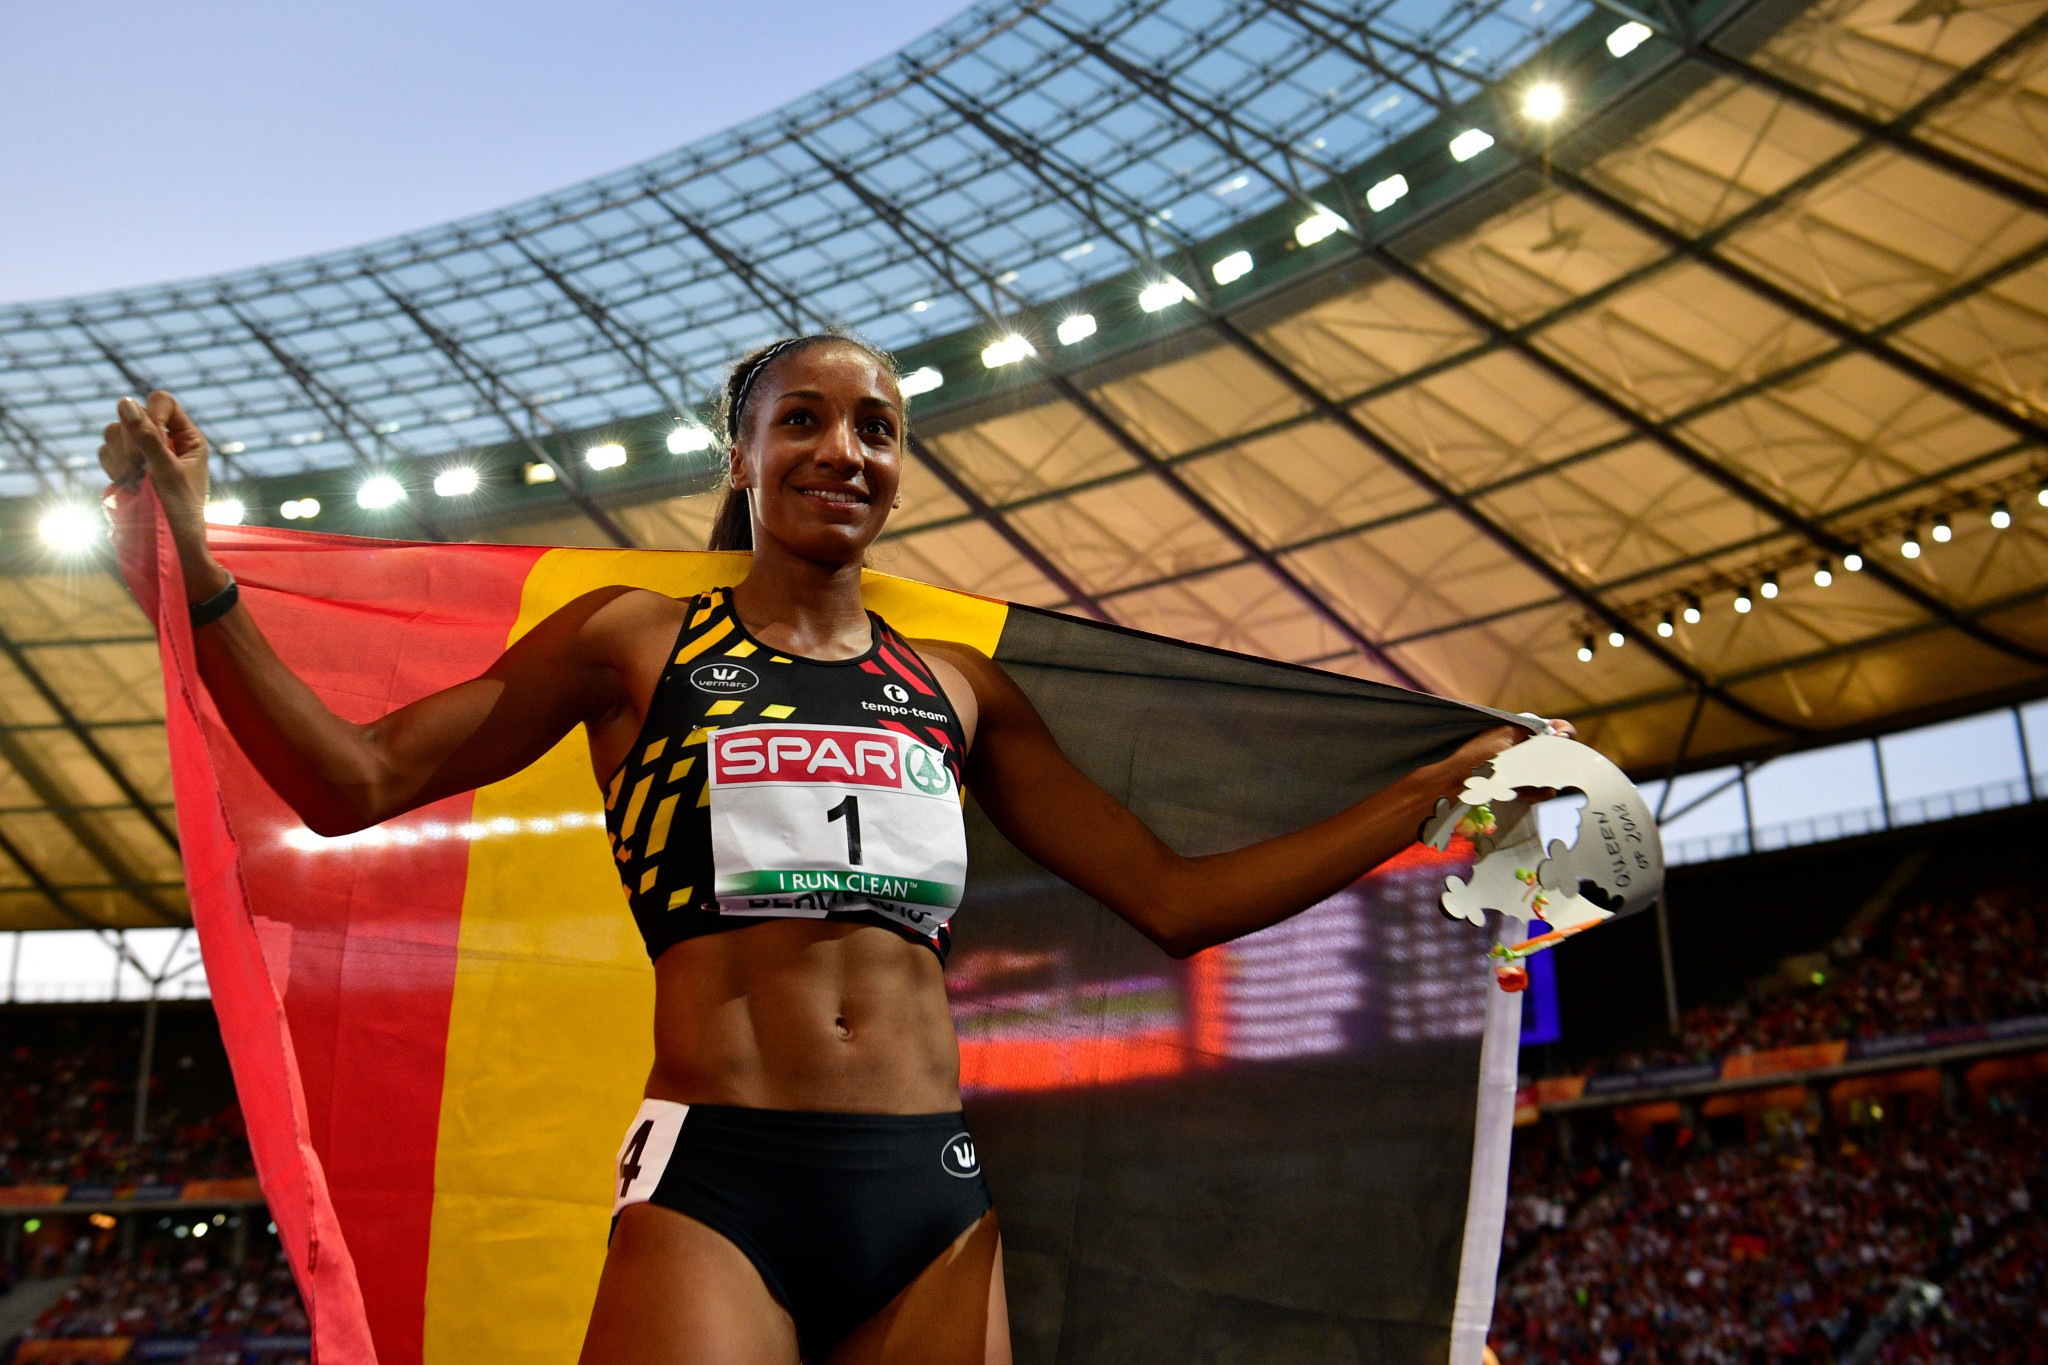 World and Olympic champion Nafissatou Thiam of Belgium claimed the women's heptathlon gold medal as action continued today at the 2018 European Athletics Championships in Berlin ©Getty Images